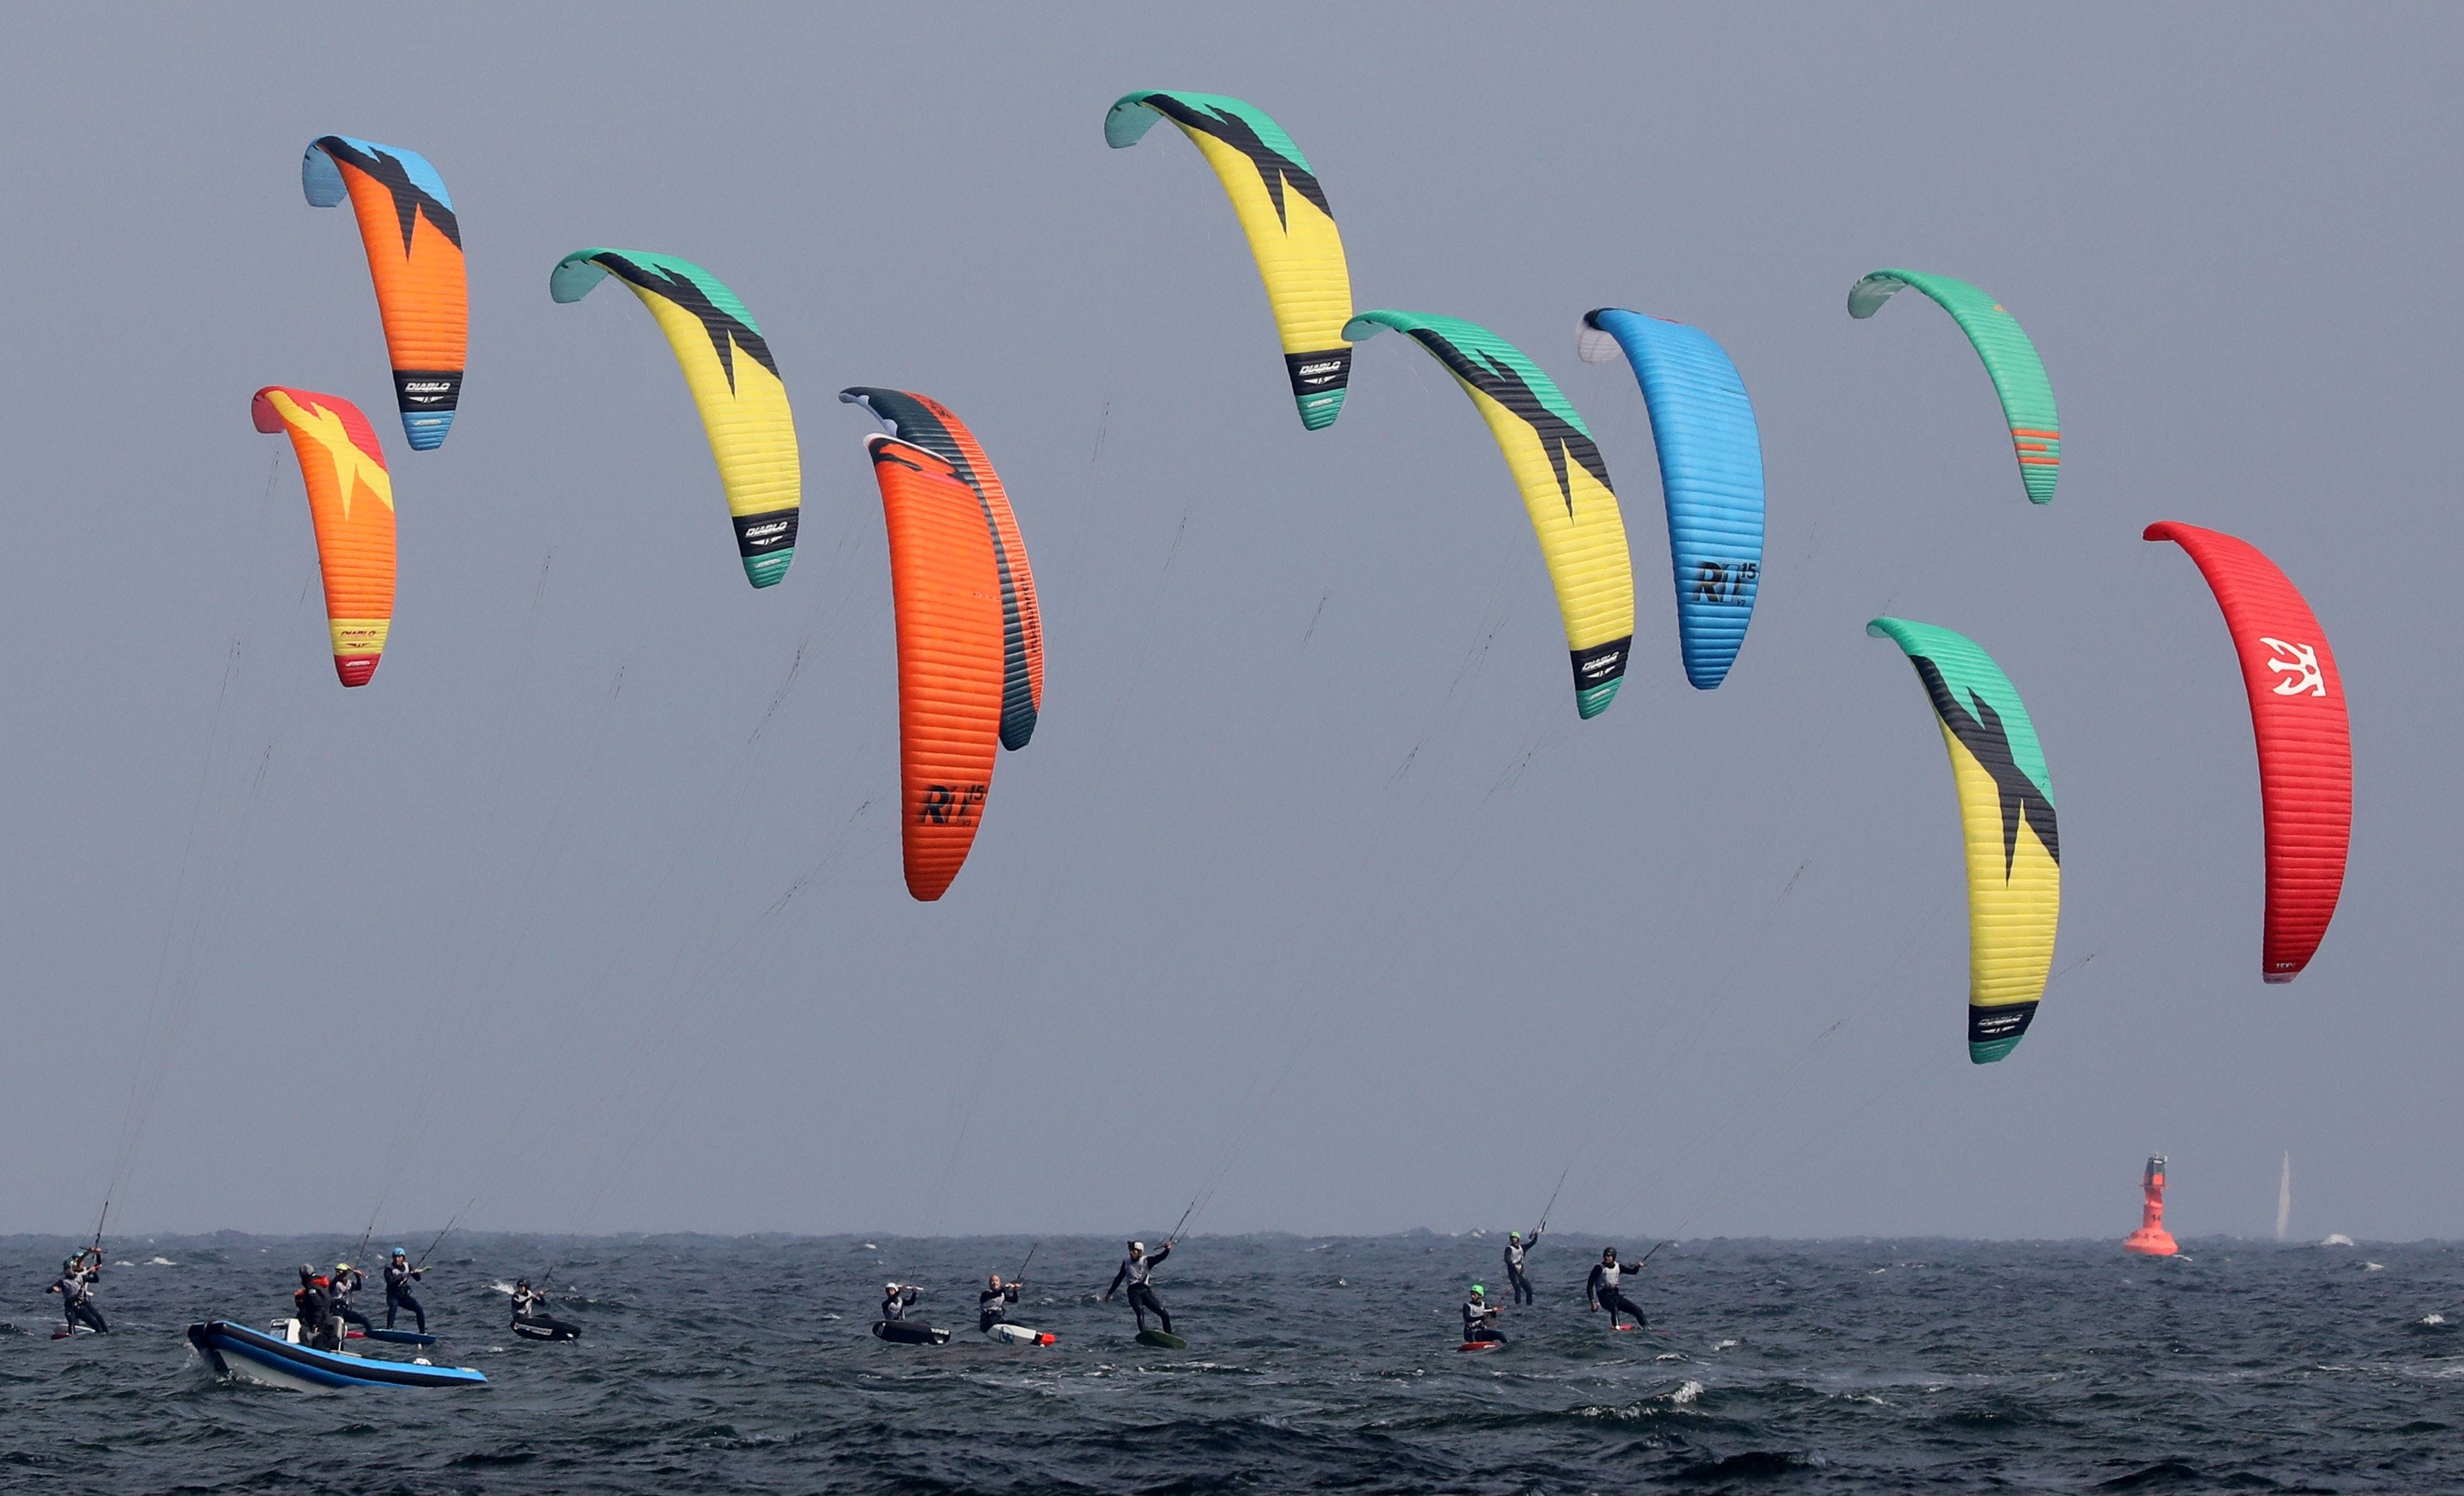 Kite surfers take the start of a race at the European Championships off the coast of Warnemuende, on the Baltic Sea in northern Germany.